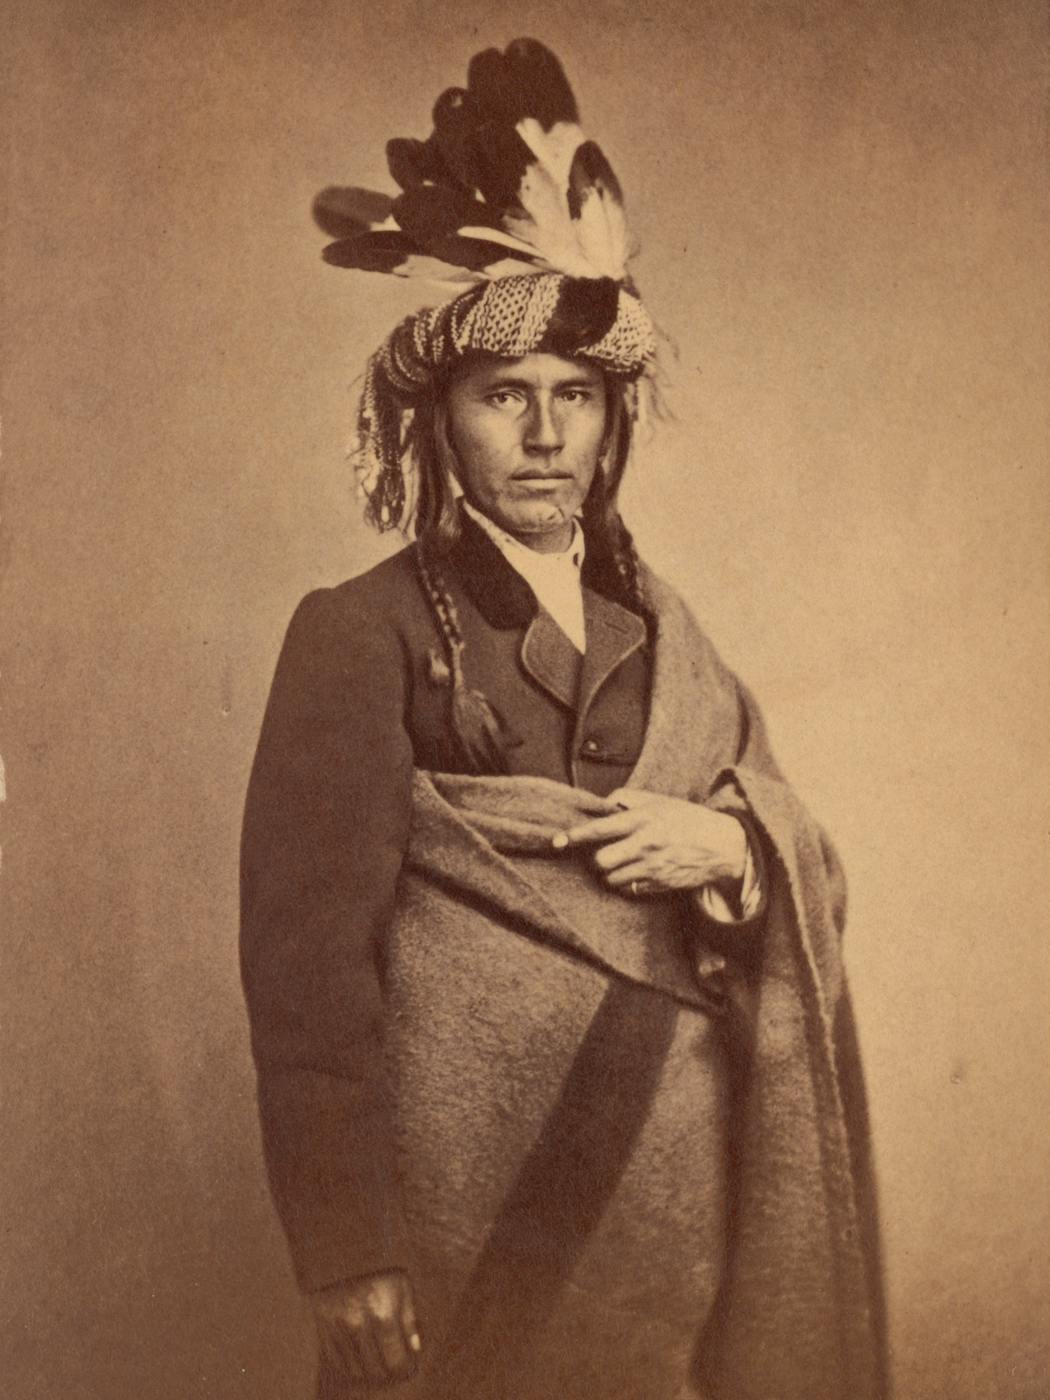 Ojibwe Chief Hole-in-the-Day the Younger, likely photographed in the 1860s.